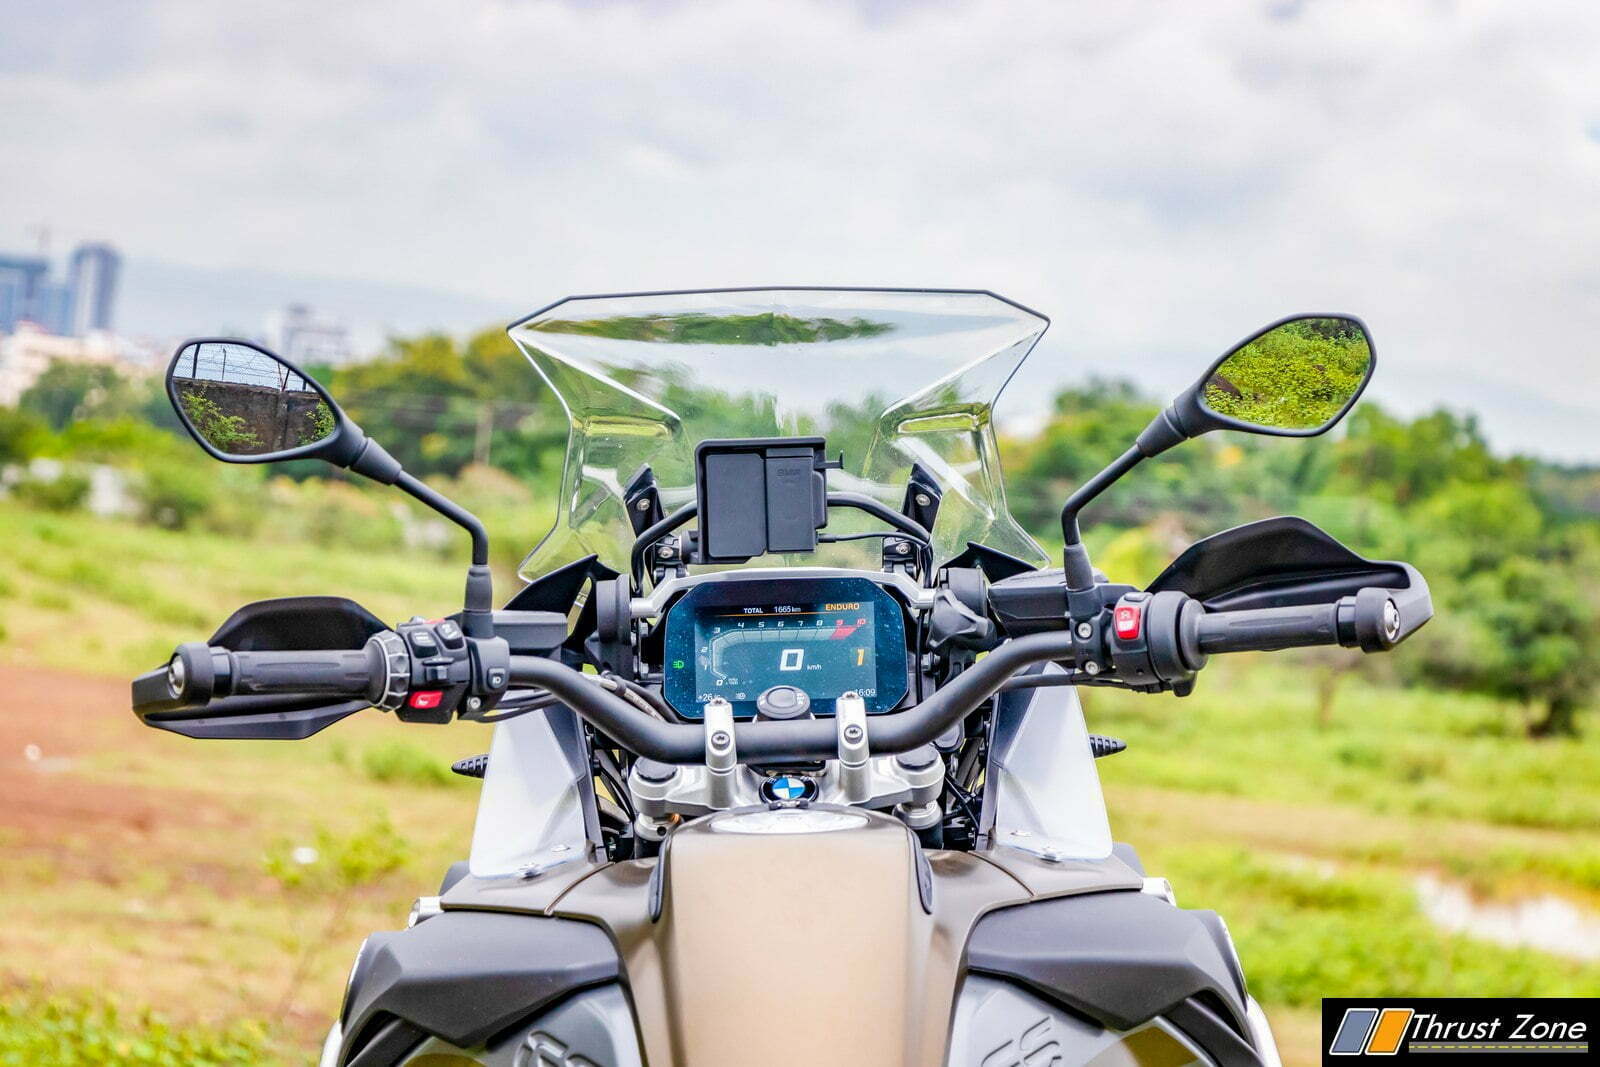 2019-BMW-GS-1250-Adventure-India-Review-15